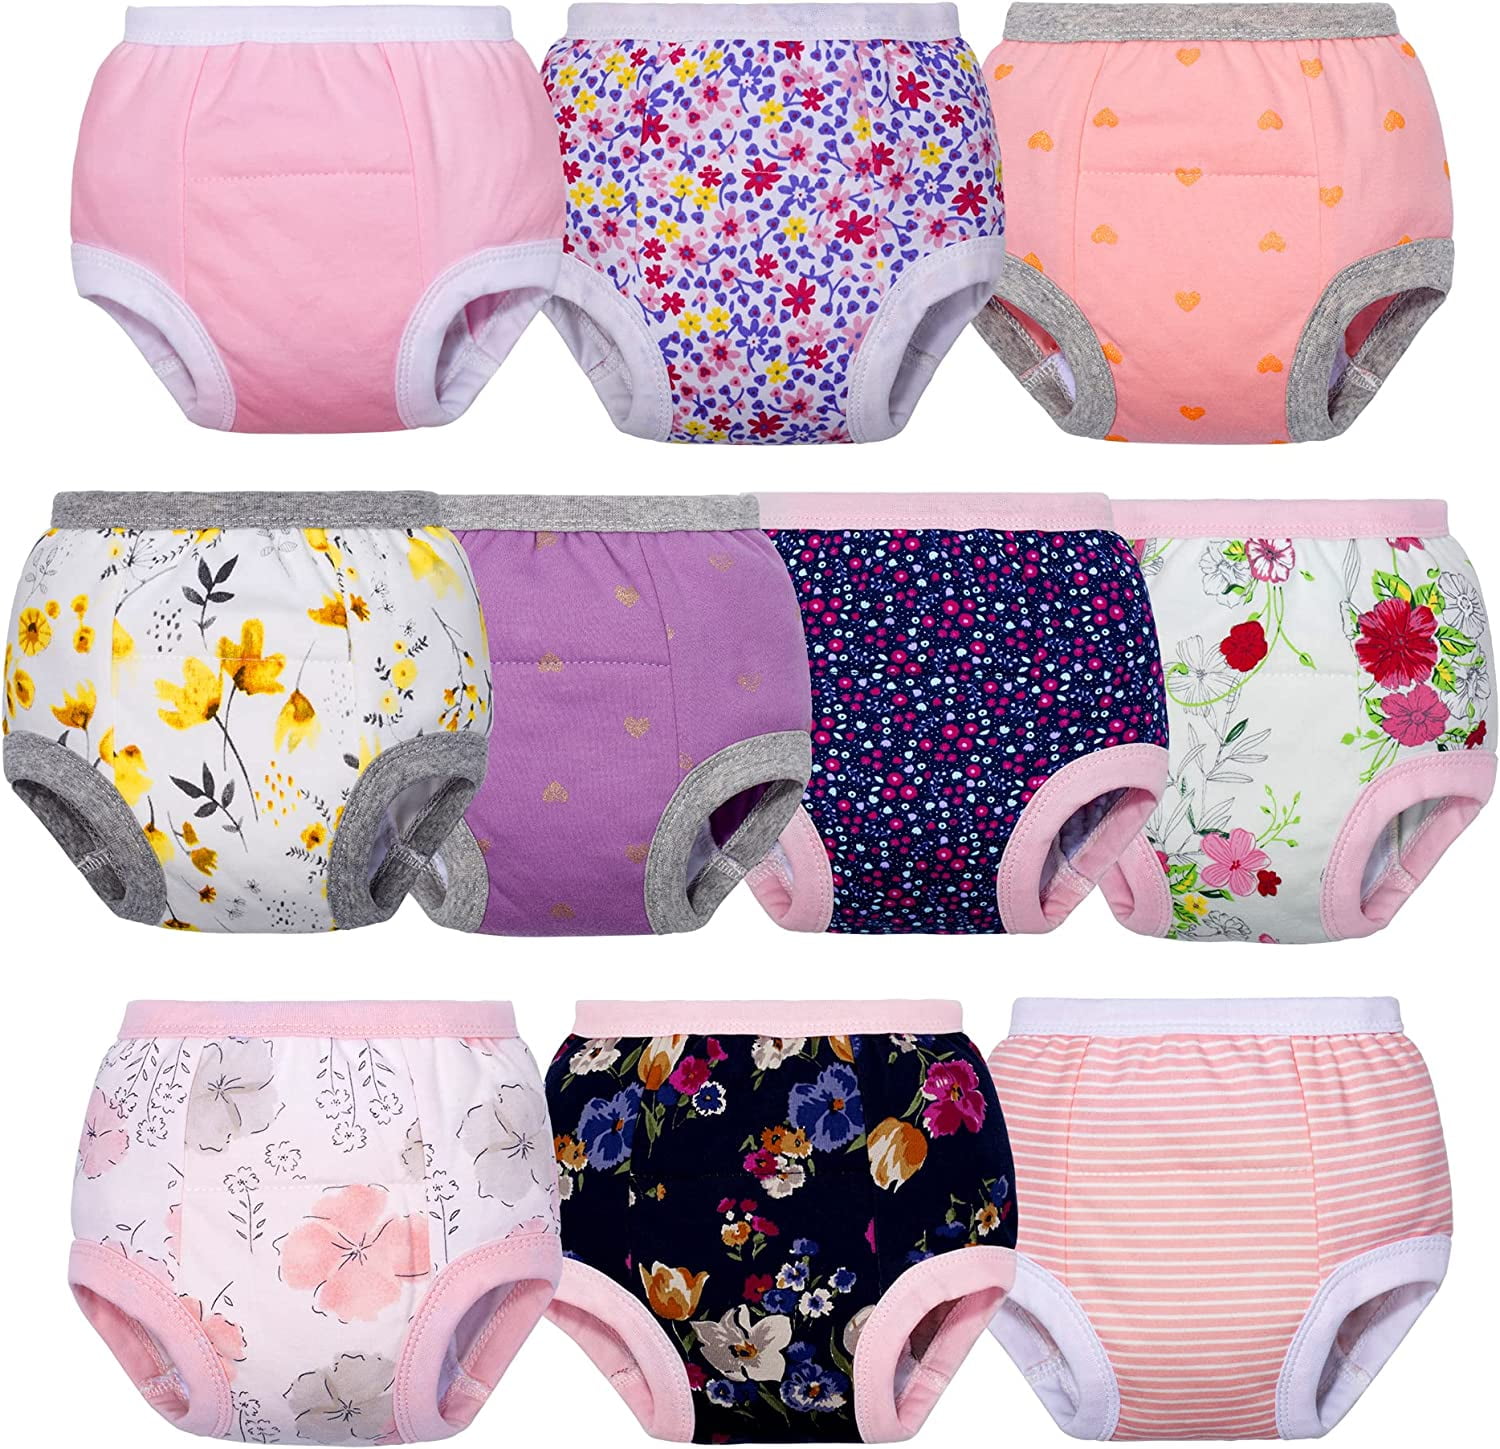  Yufanlili 8 Pack Potty Training Underwear,Cotton Toddler  Absorbent Training Pants,Toddlers Pee Training Diaper Underwear 3T-4T : Baby